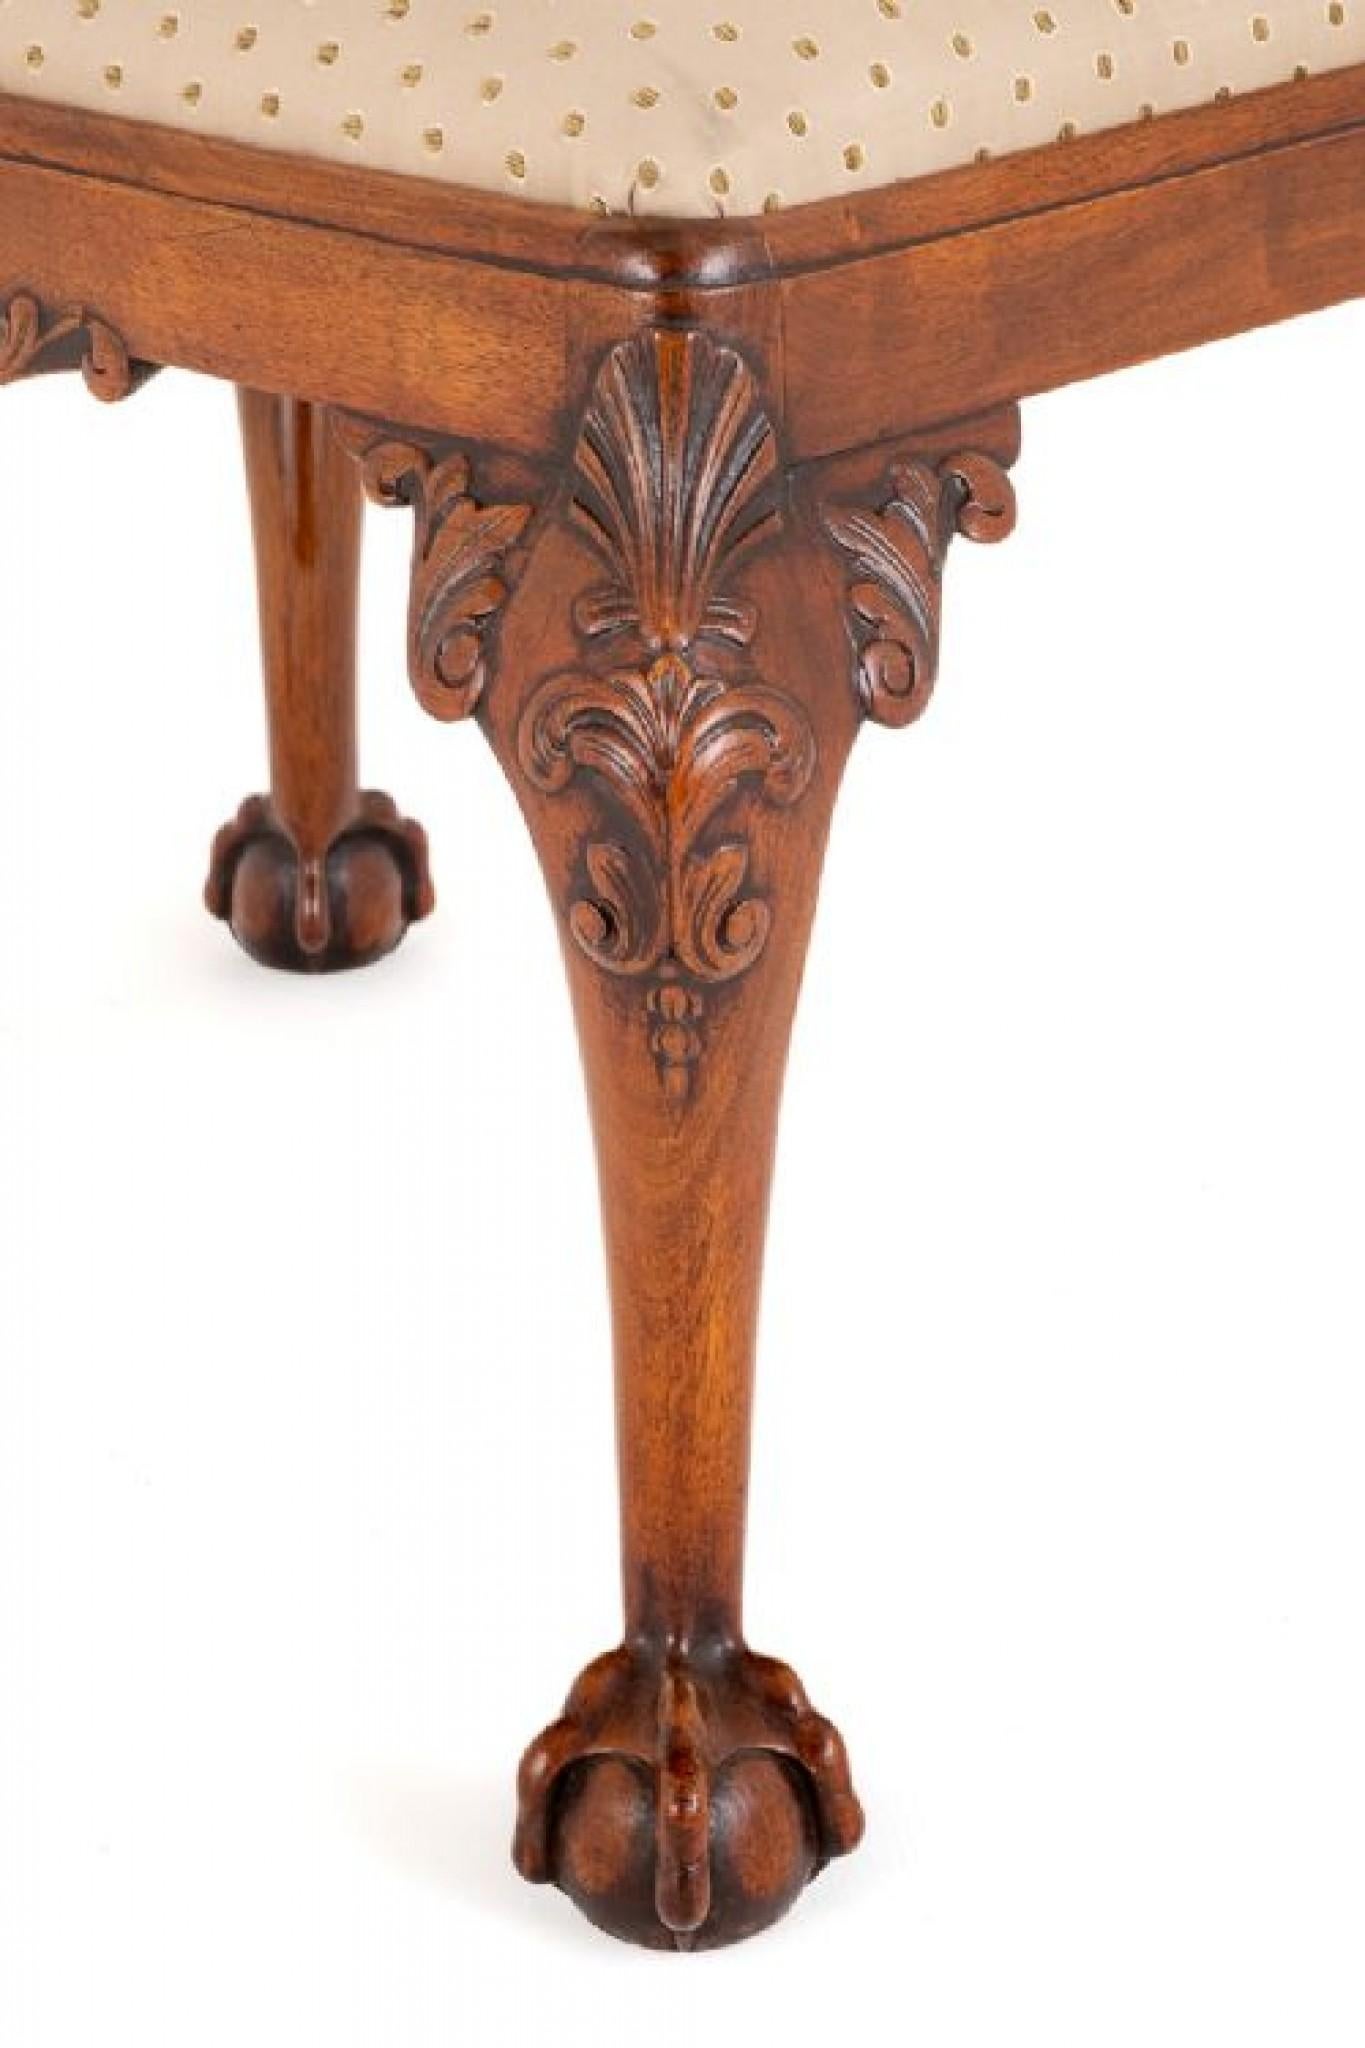 Mahogany stool in the style of Thomas Chippendale.
circa 1920
This stool stands upon cabriole legs with boldly carved ball and claw feet.
The knees also having quality carvings.
The stool has recently been re upholstered and is presented in good